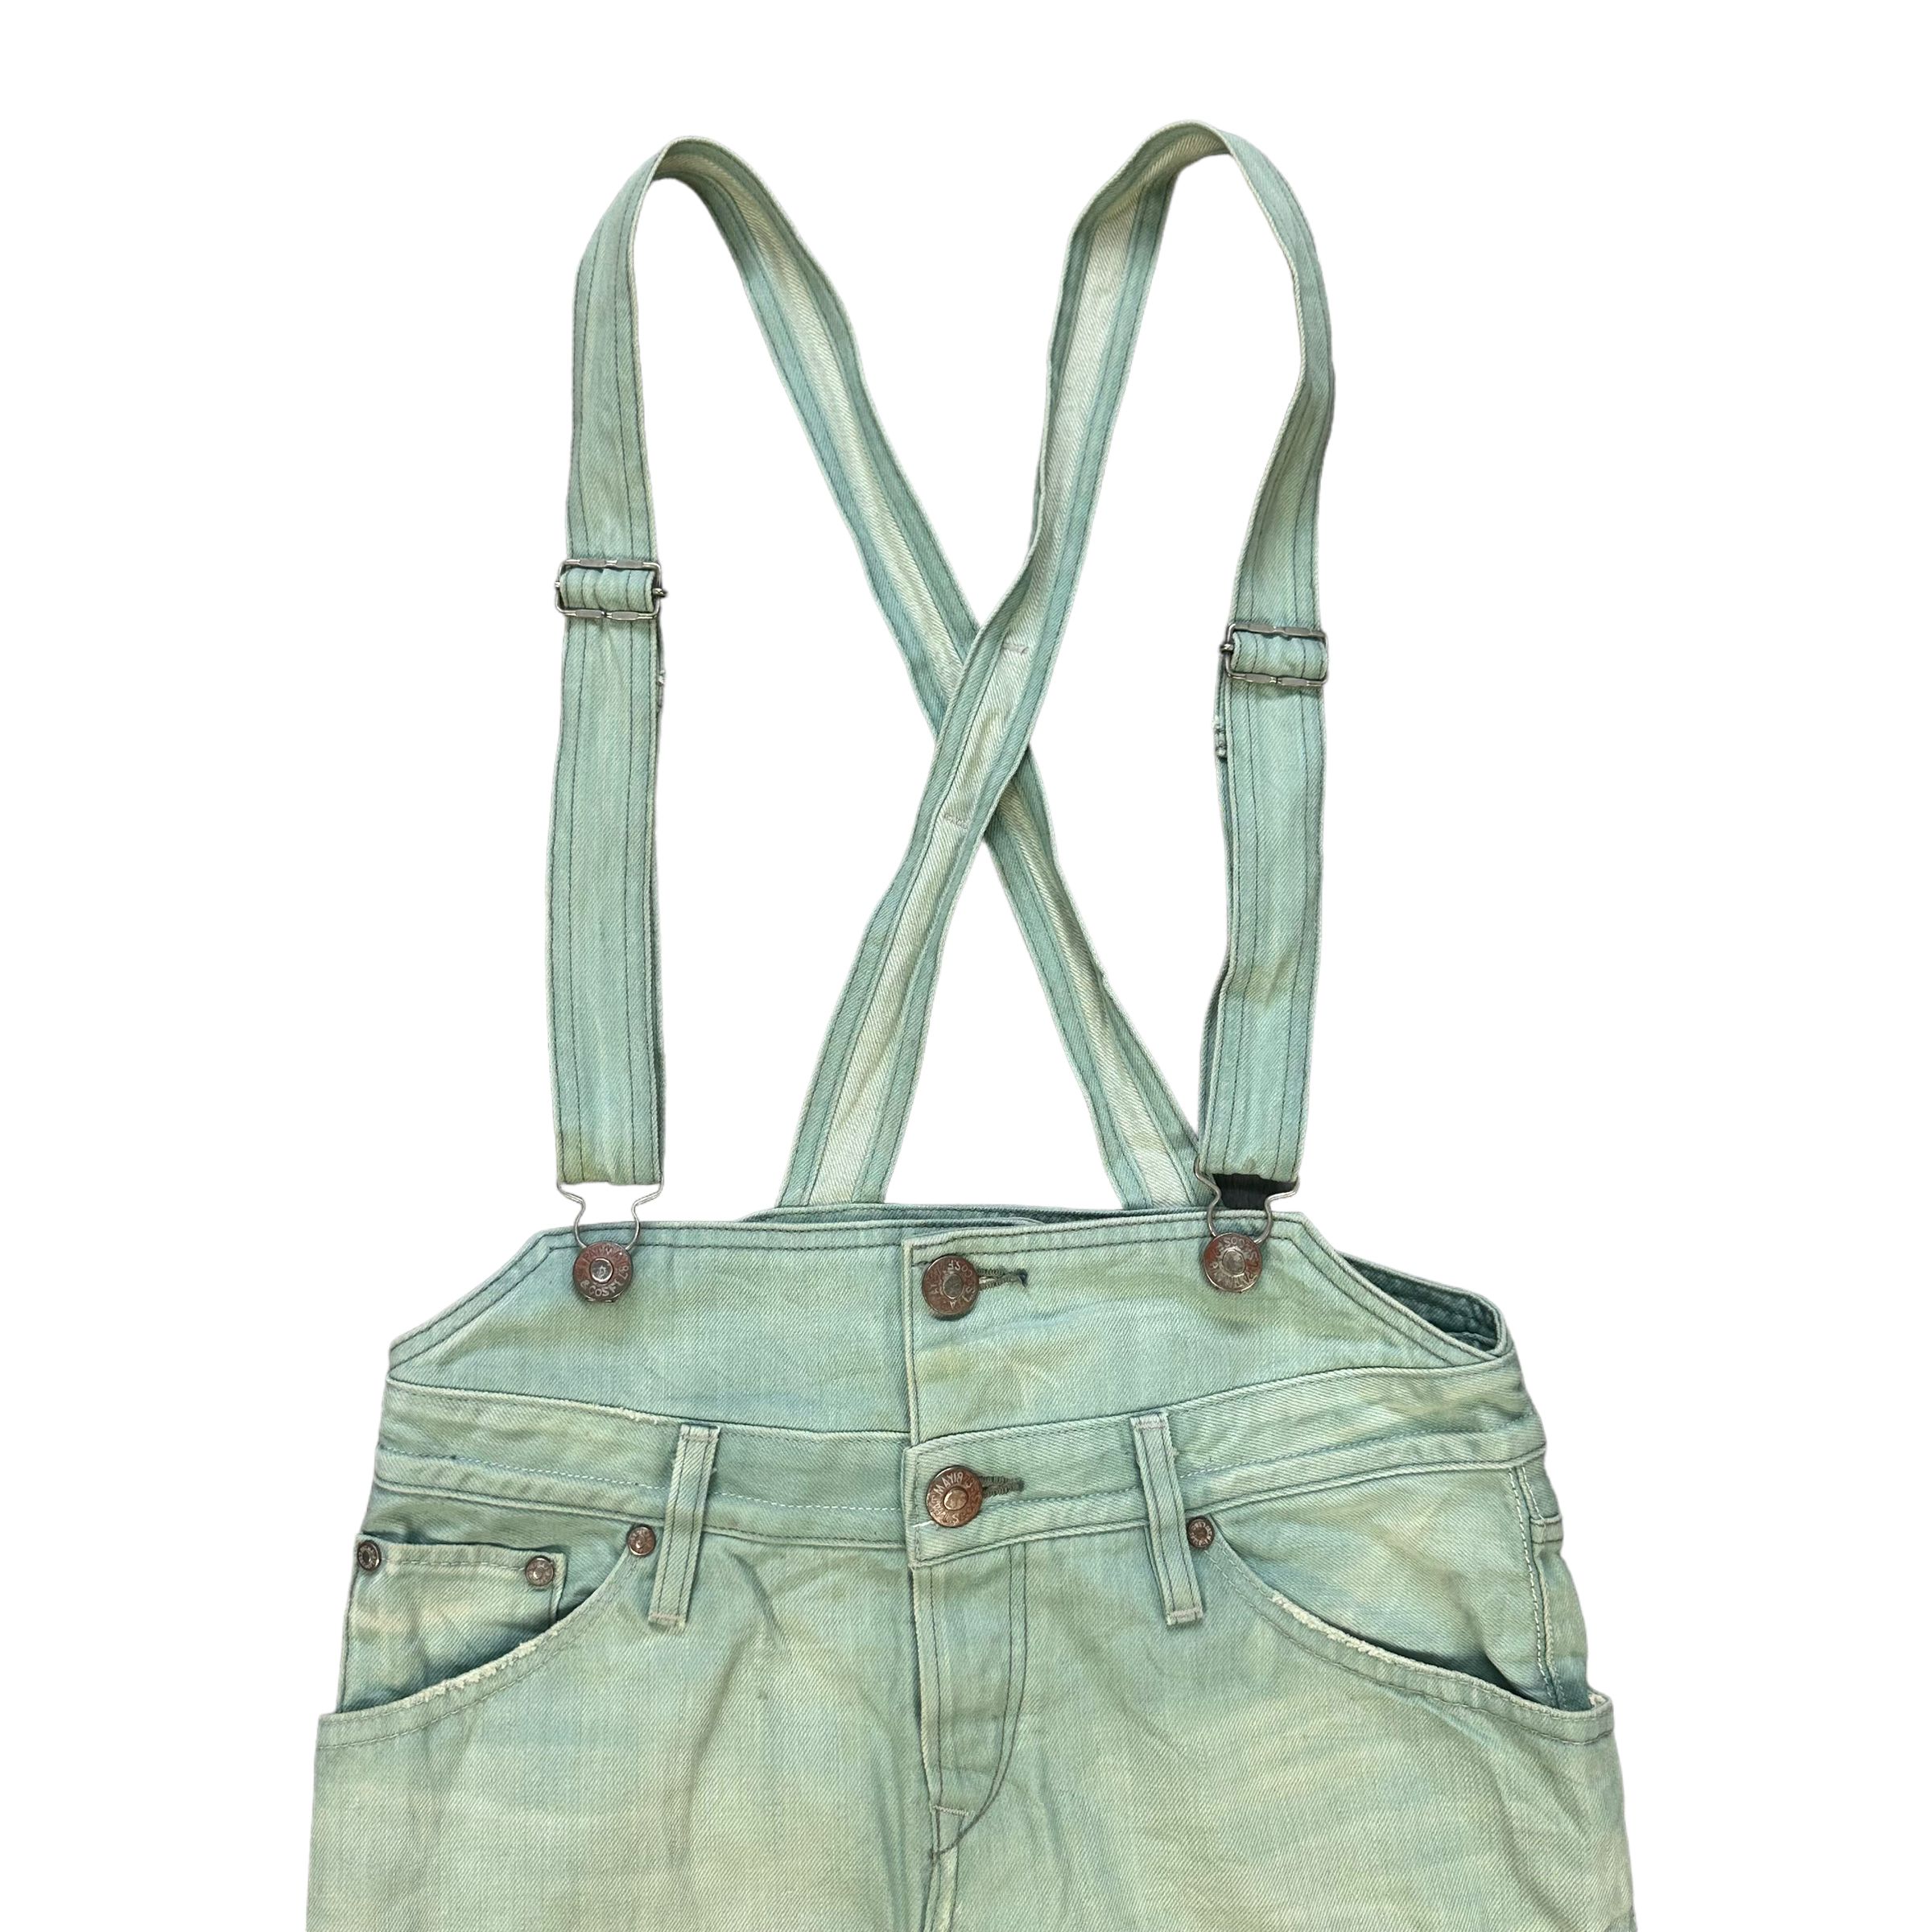 LEVIS LADY STYLE OVERALL MINI SKIRT IN GREEN DENIM #8659-019 - 2